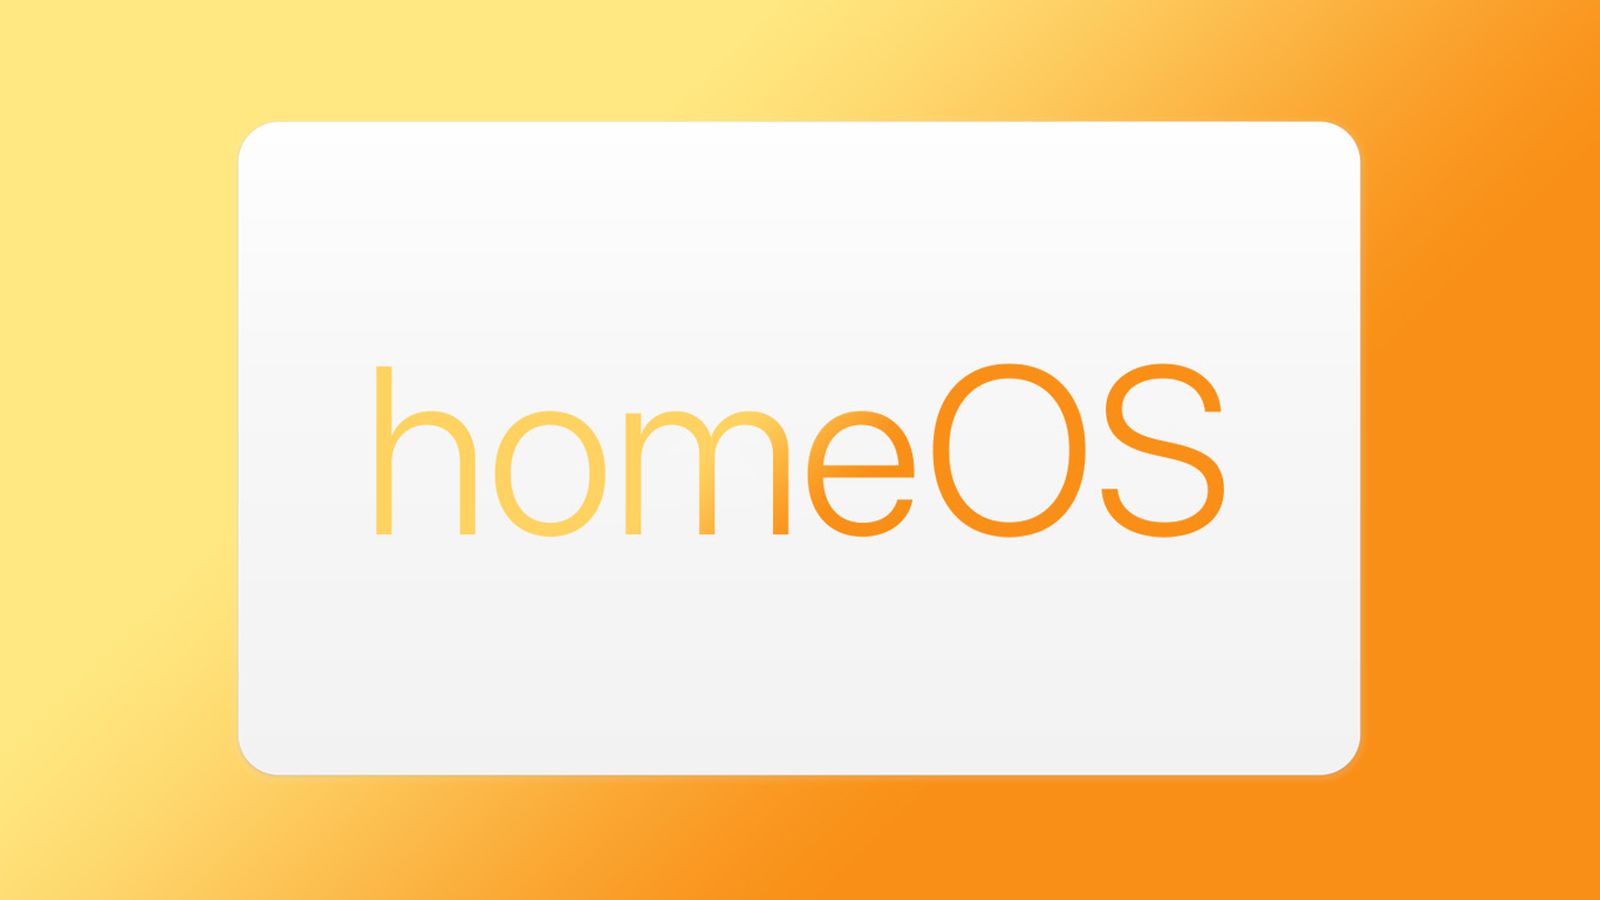 Is Apple's "homeOS" coming? The company's job postings include mentions of a smart home OS